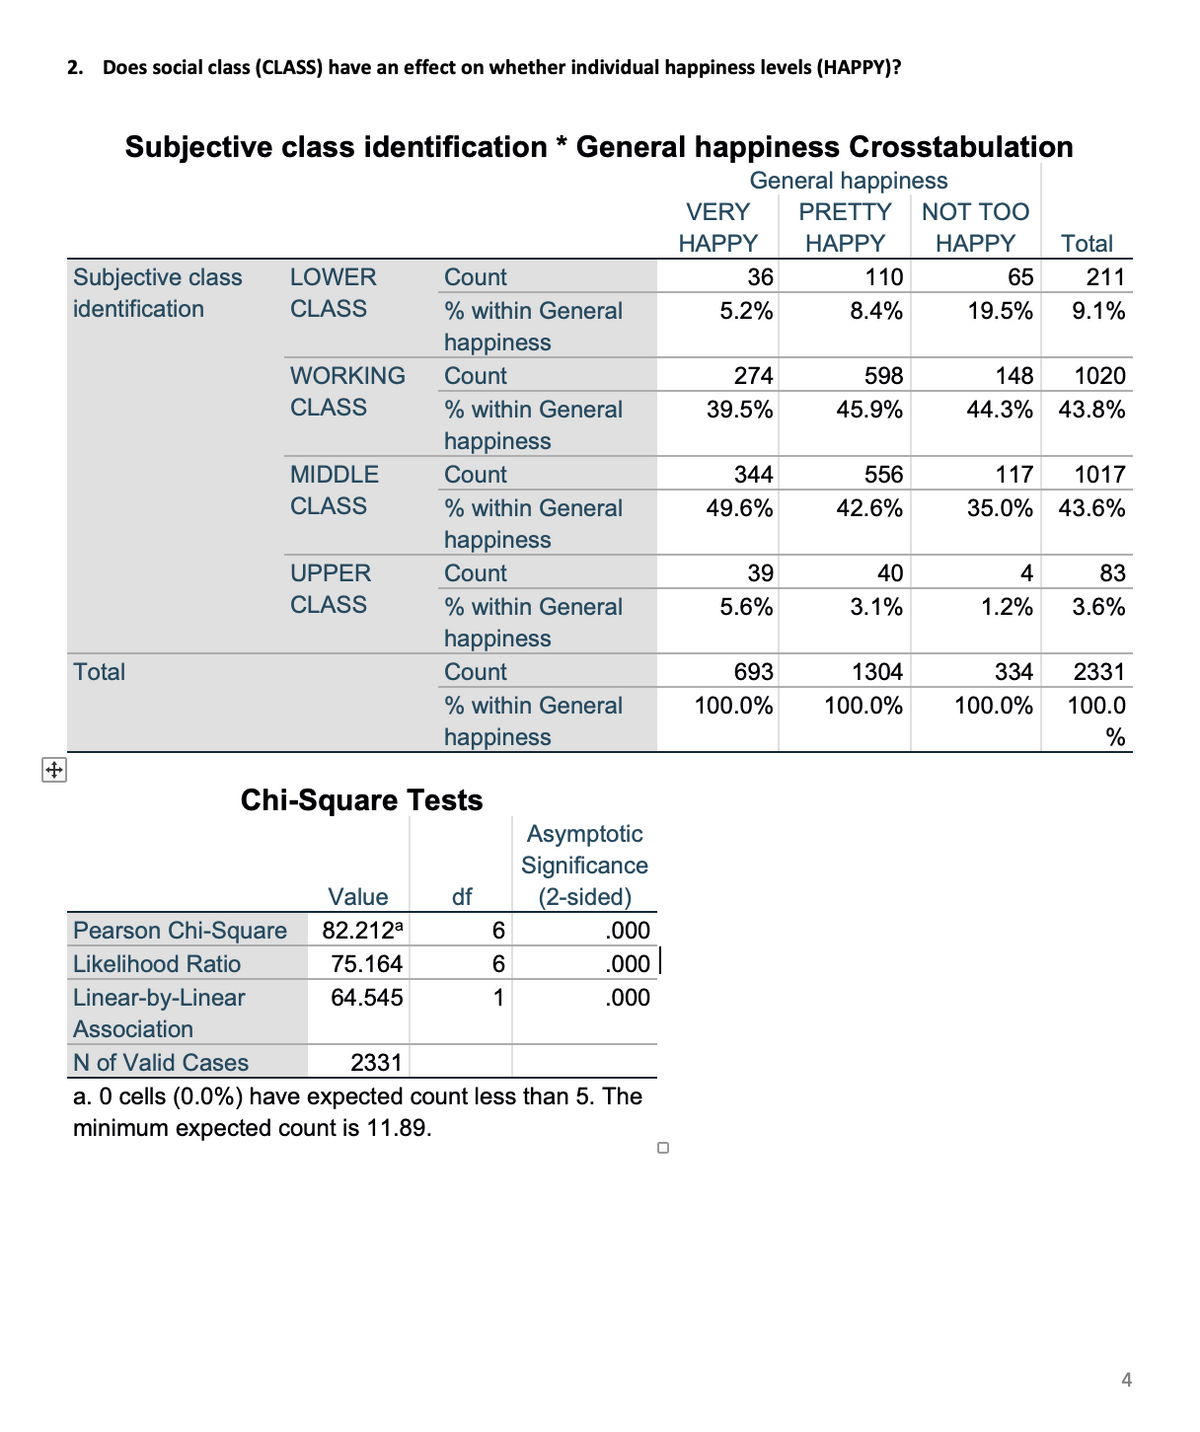 2. Does social class (CLASS) have an effect on whether individual happiness levels (HAPPY)?
Subjective class identification * General happiness Crosstabulation
General happiness
VERY
PRETTY
NOT TOO
HAPPY
НАРPY
НАРPY
Total
Subjective class
LOWER
Count
36
110
65
211
identification
CLASS
% within General
5.2%
8.4%
19.5%
9.1%
happiness
WORKING
Count
274
598
148
1020
CLASS
% within General
39.5%
45.9%
44.3% 43.8%
happiness
MIDDLE
Count
344
556
117
1017
CLASS
% within General
49.6%
42.6%
35.0% 43.6%
happiness
UPPER
Count
39
40
4
83
CLASS
% within General
5.6%
3.1%
1.2%
3.6%
happiness
Total
Count
693
1304
334
2331
% within General
100.0%
100.0%
100.0%
100.0
happiness
%
Chi-Square Tests
Asymptotic
Significance
(2-sided)
Value
df
Pearson Chi-Square
82.212a
6
.000
Likelihood Ratio
75.164
6
.000|
Linear-by-Linear
64.545
1
.000
Association
N of Valid Cases
2331
a. 0 cells (0.0%) have expected count less than 5. The
minimum expected count is 11.89.
4
